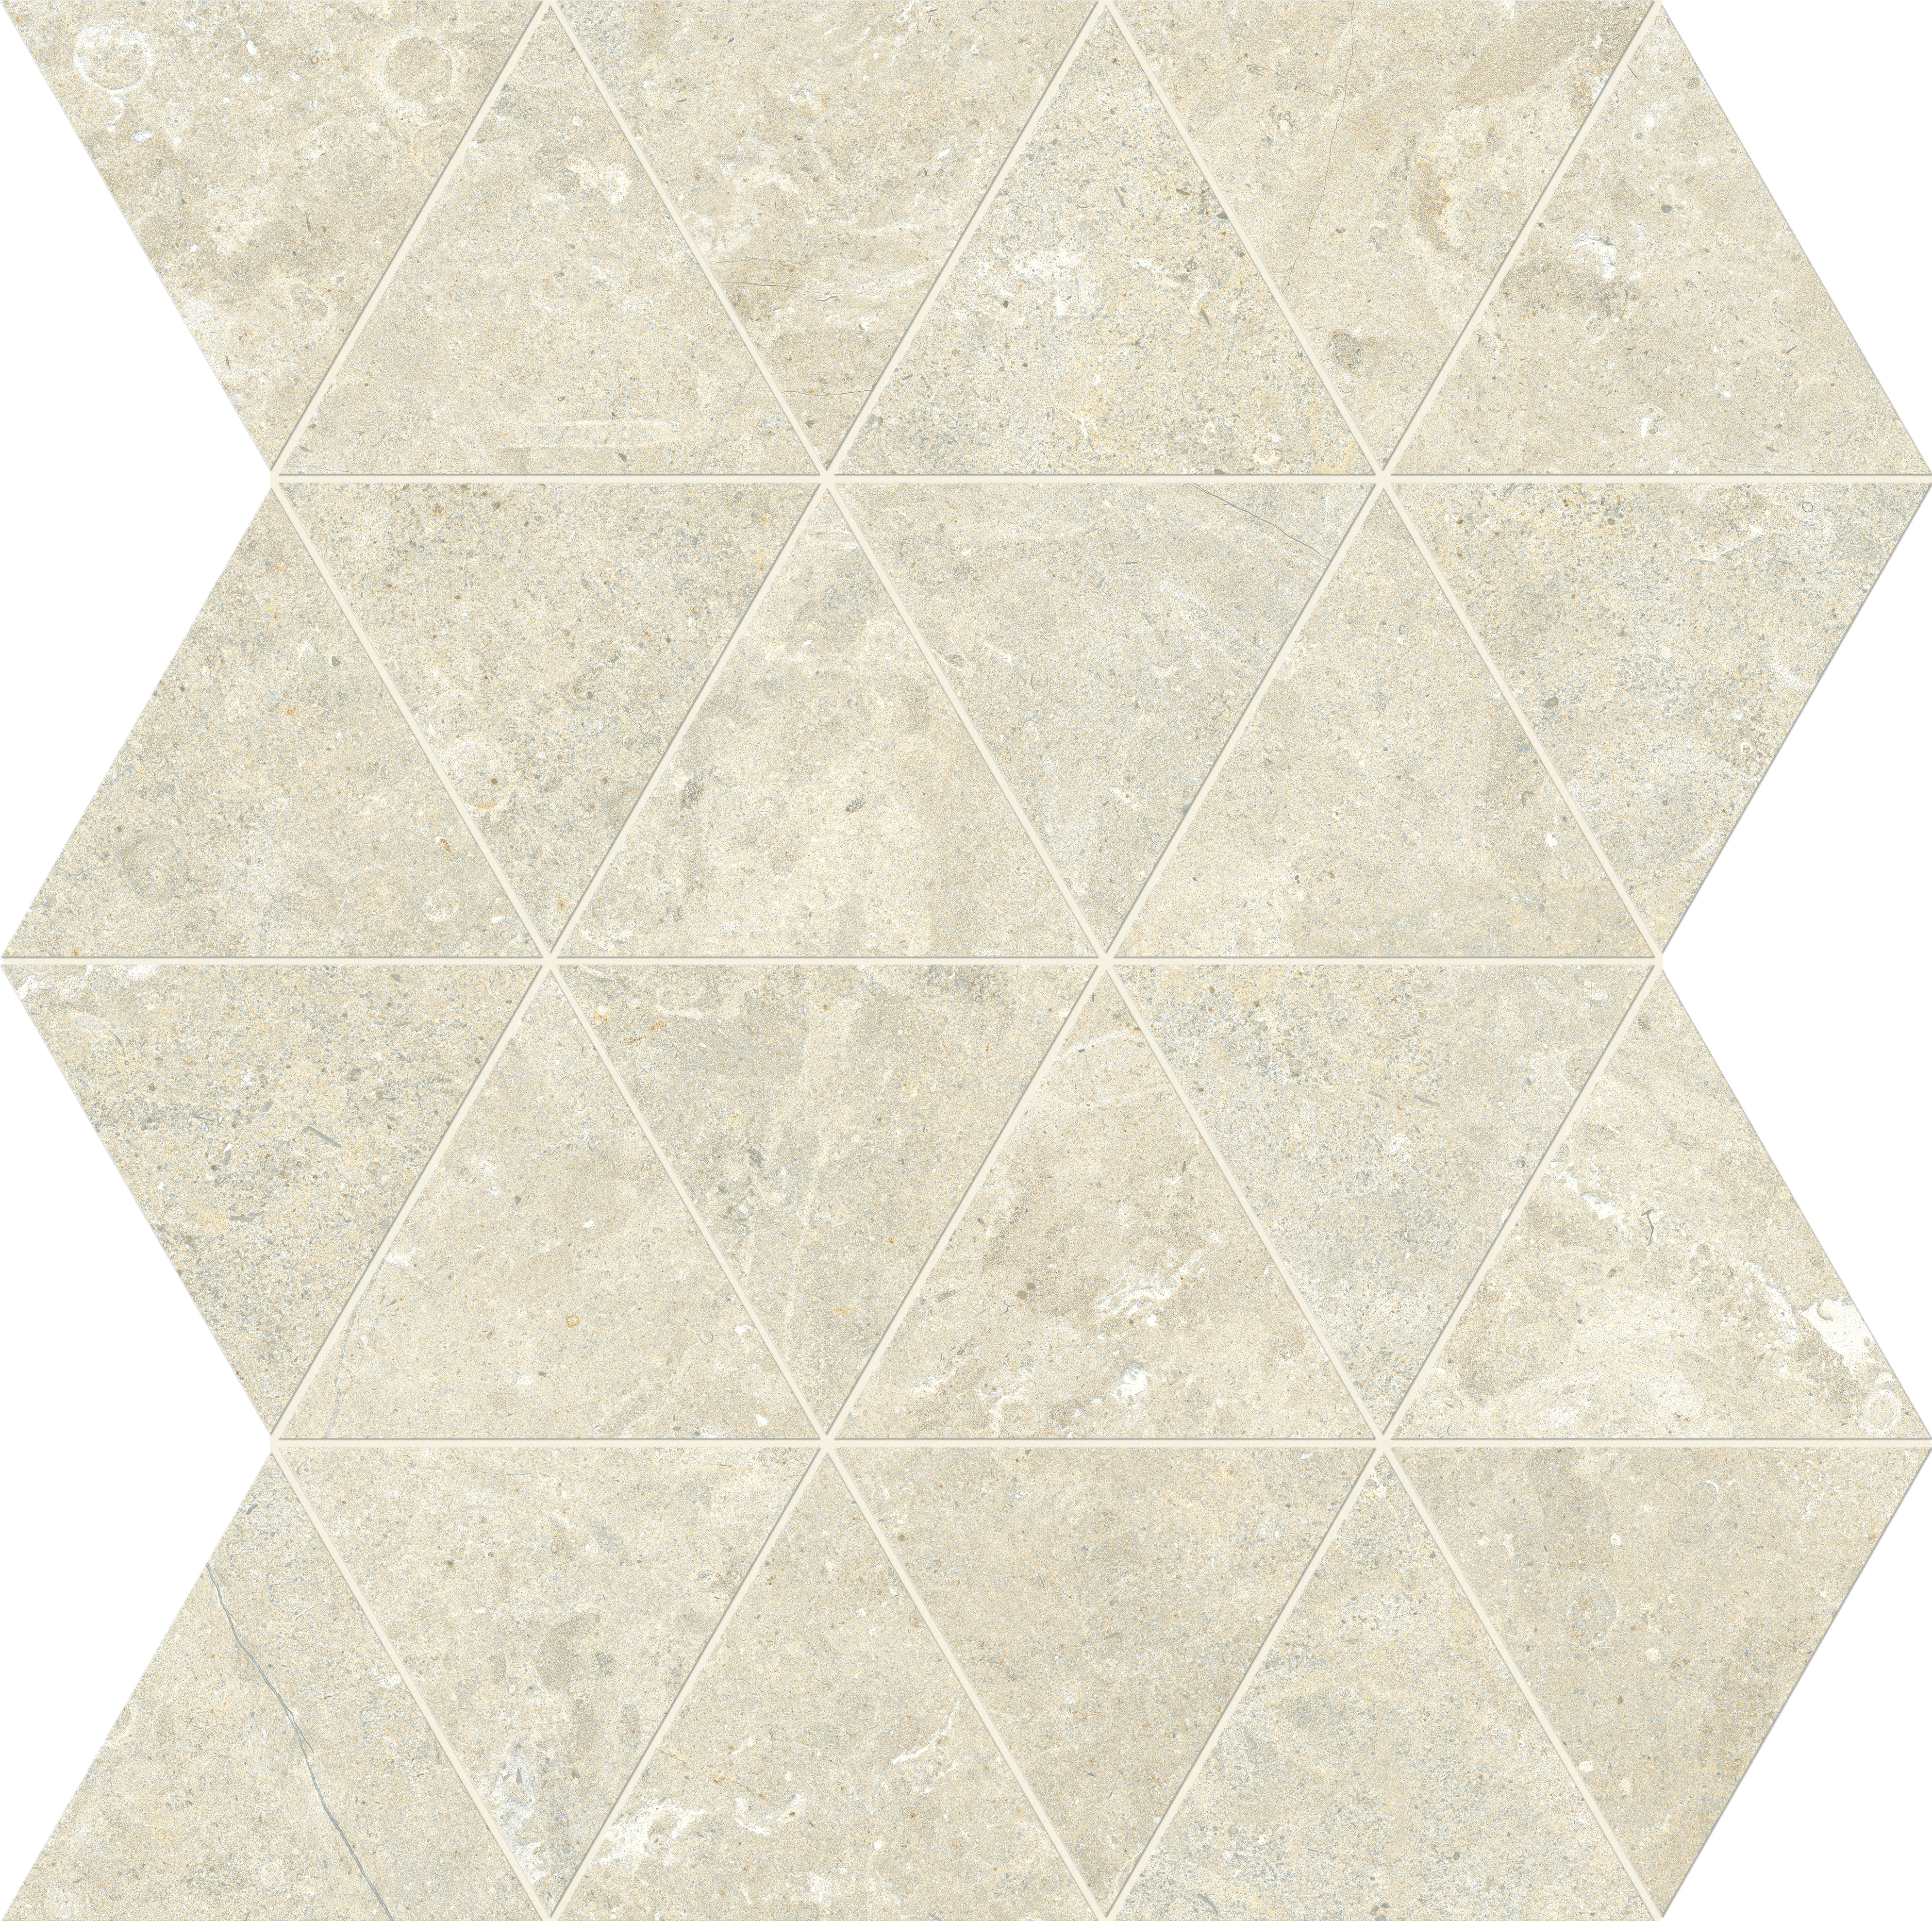 Marca Corona Arkistyle Clay Strutturato Hithick Fractal Tesserre J288 strutturato hithick 29x33,5cm rectified 9mm